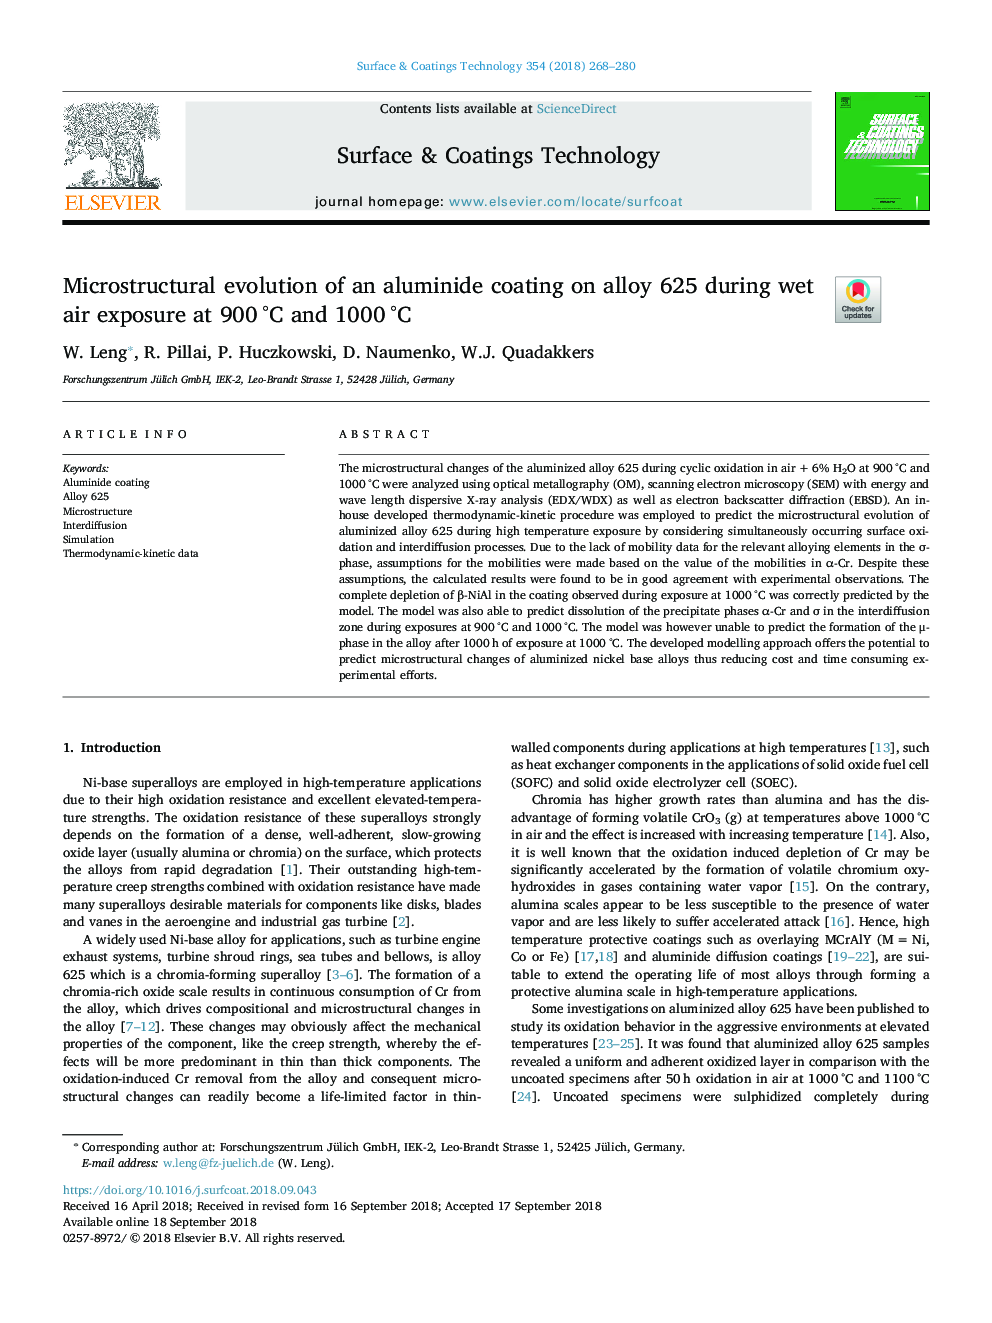 Microstructural evolution of an aluminide coating on alloy 625 during wet air exposure at 900â¯Â°C and 1000â¯Â°C